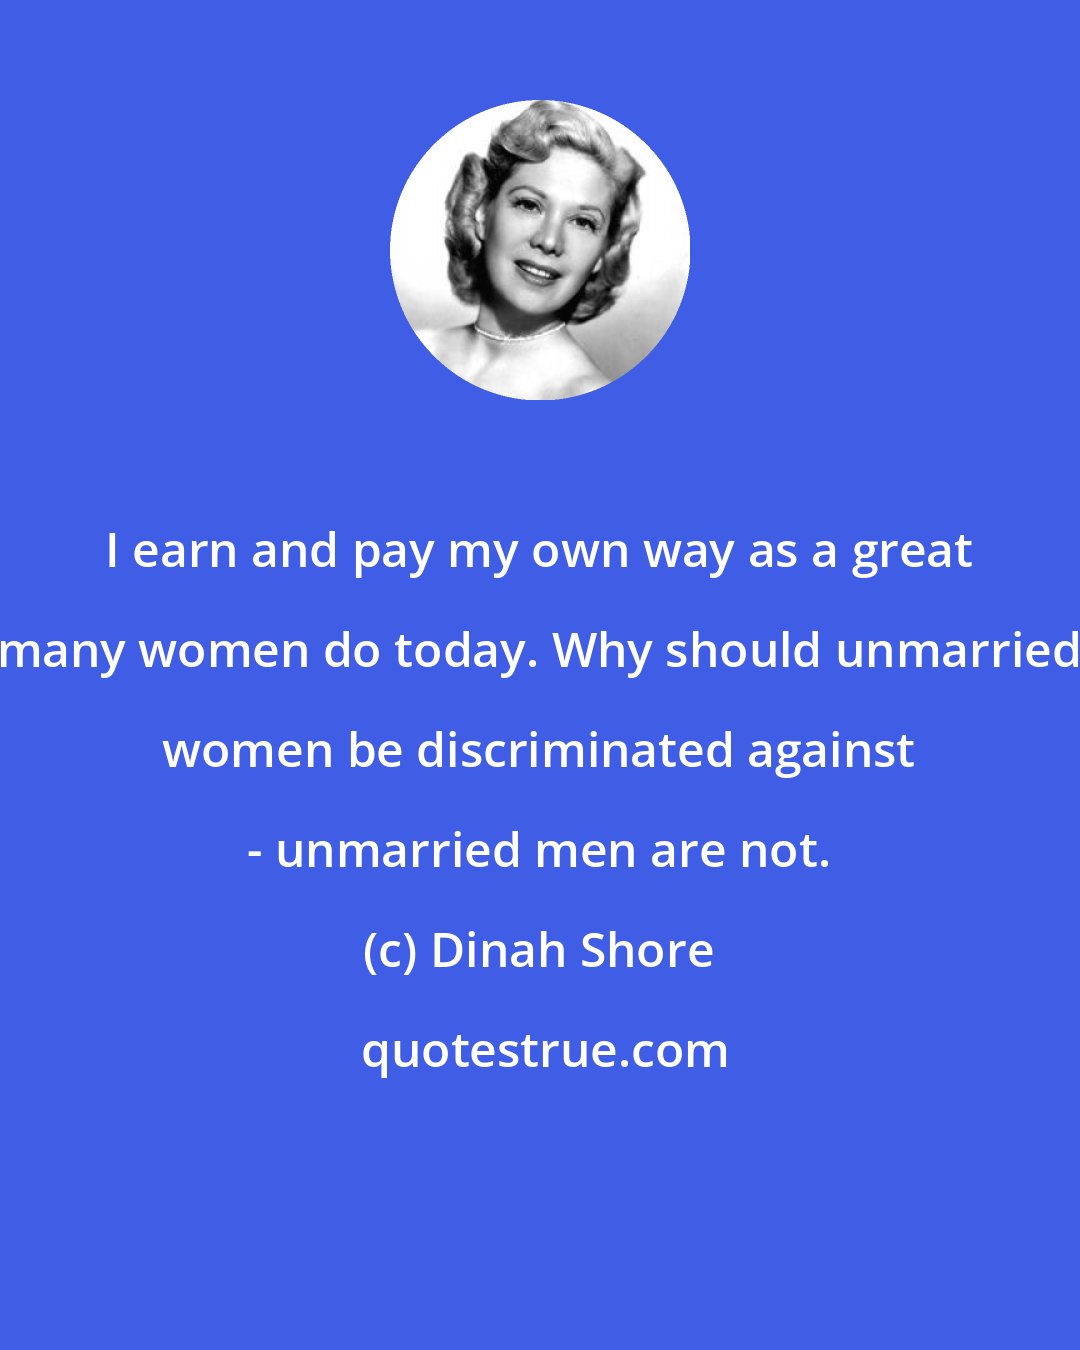 Dinah Shore: I earn and pay my own way as a great many women do today. Why should unmarried women be discriminated against - unmarried men are not.